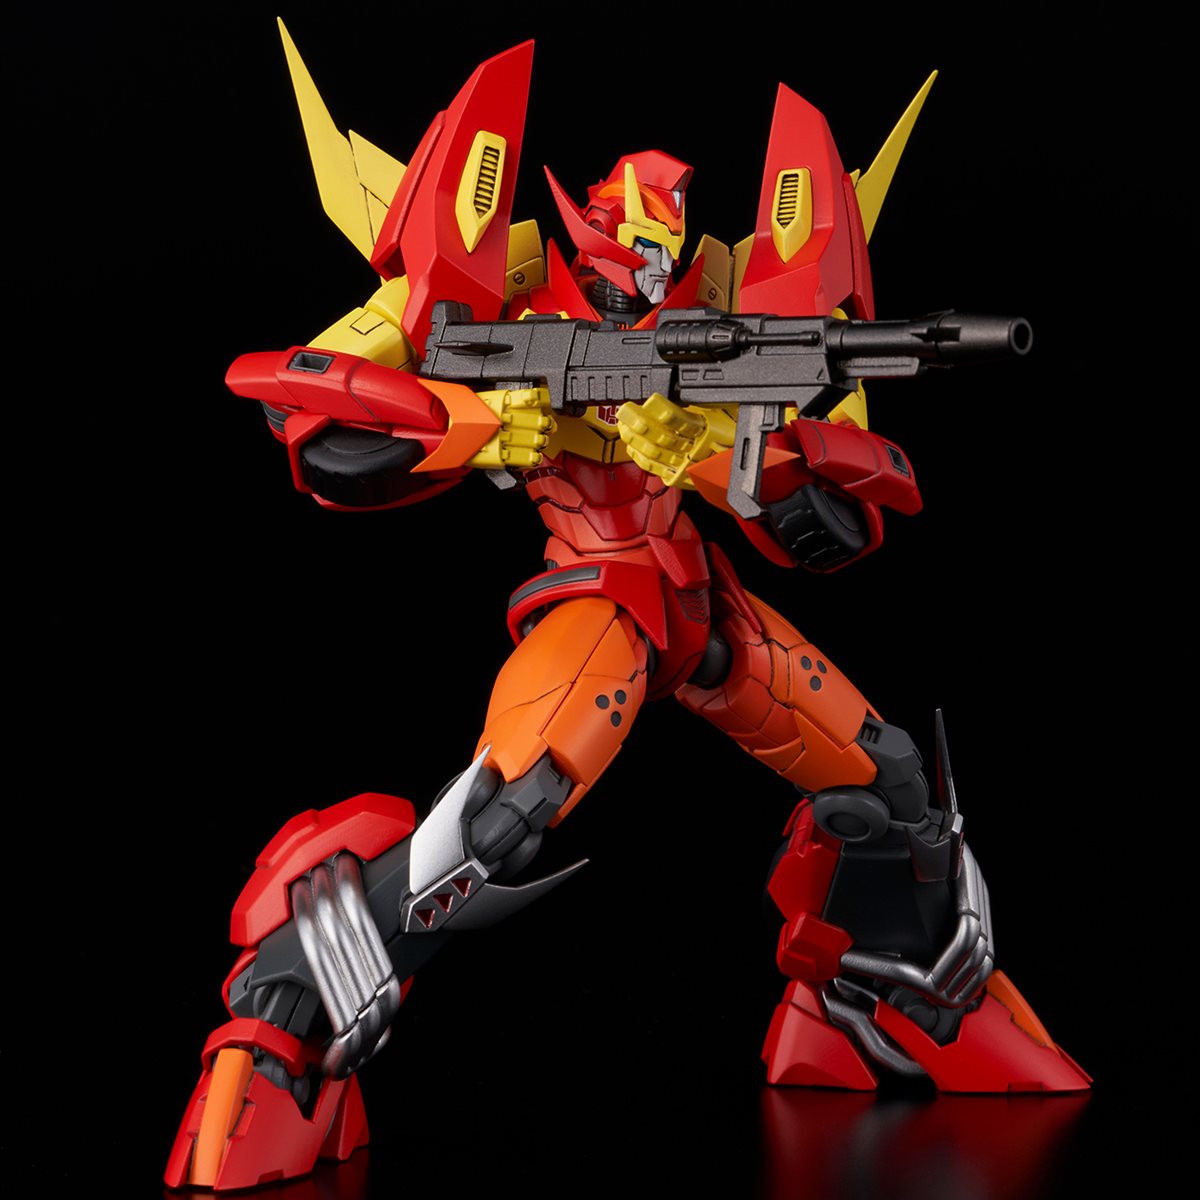 40% off model kits at Hobby Lobby, includes Furai Flame transformers kits :  r/transformers